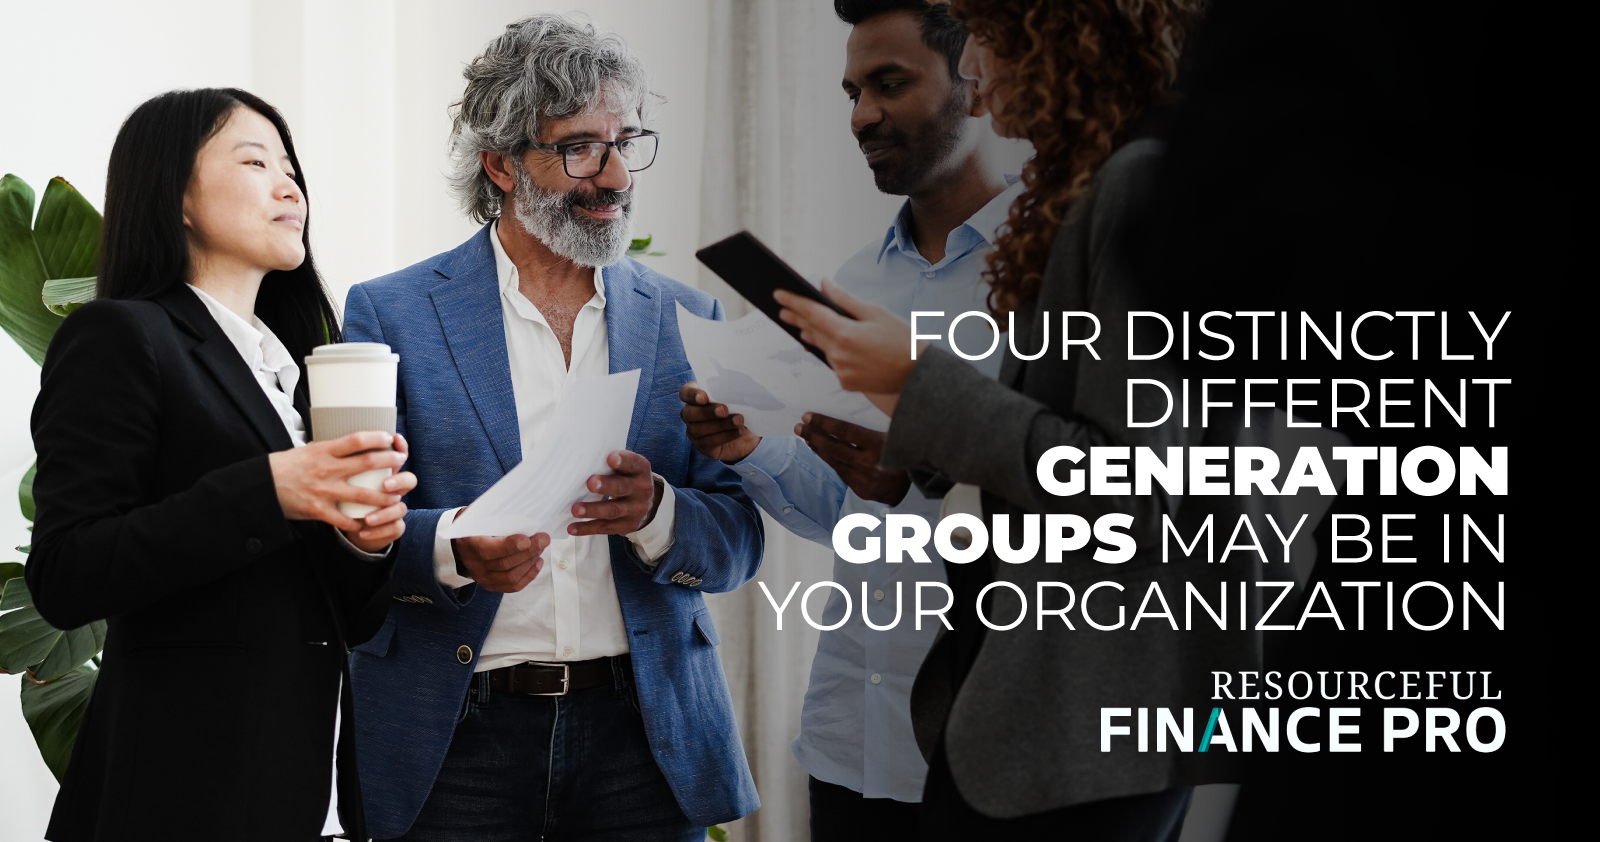 Four Distinctly Different Generation Groups May. Be In Your Organization